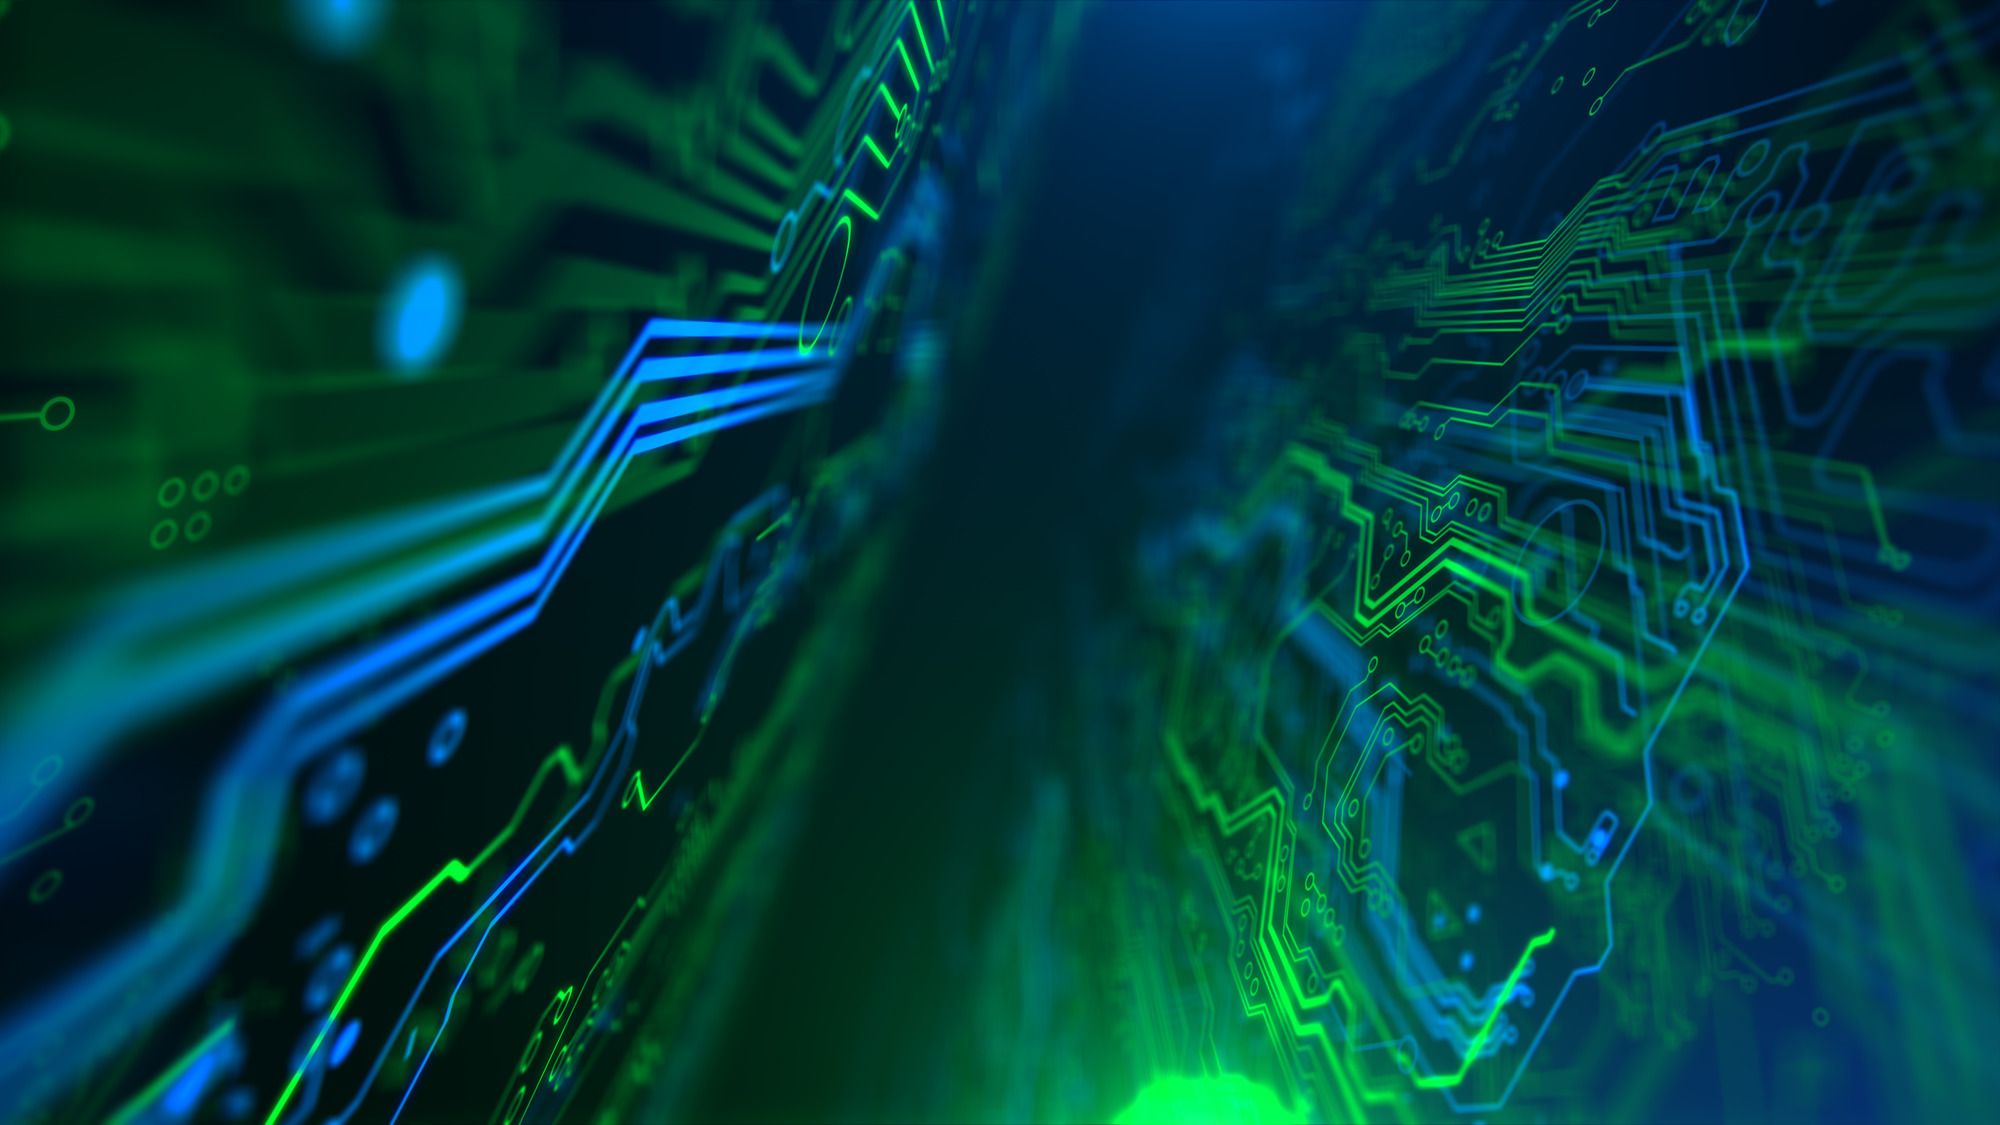 Abstract motherboard background